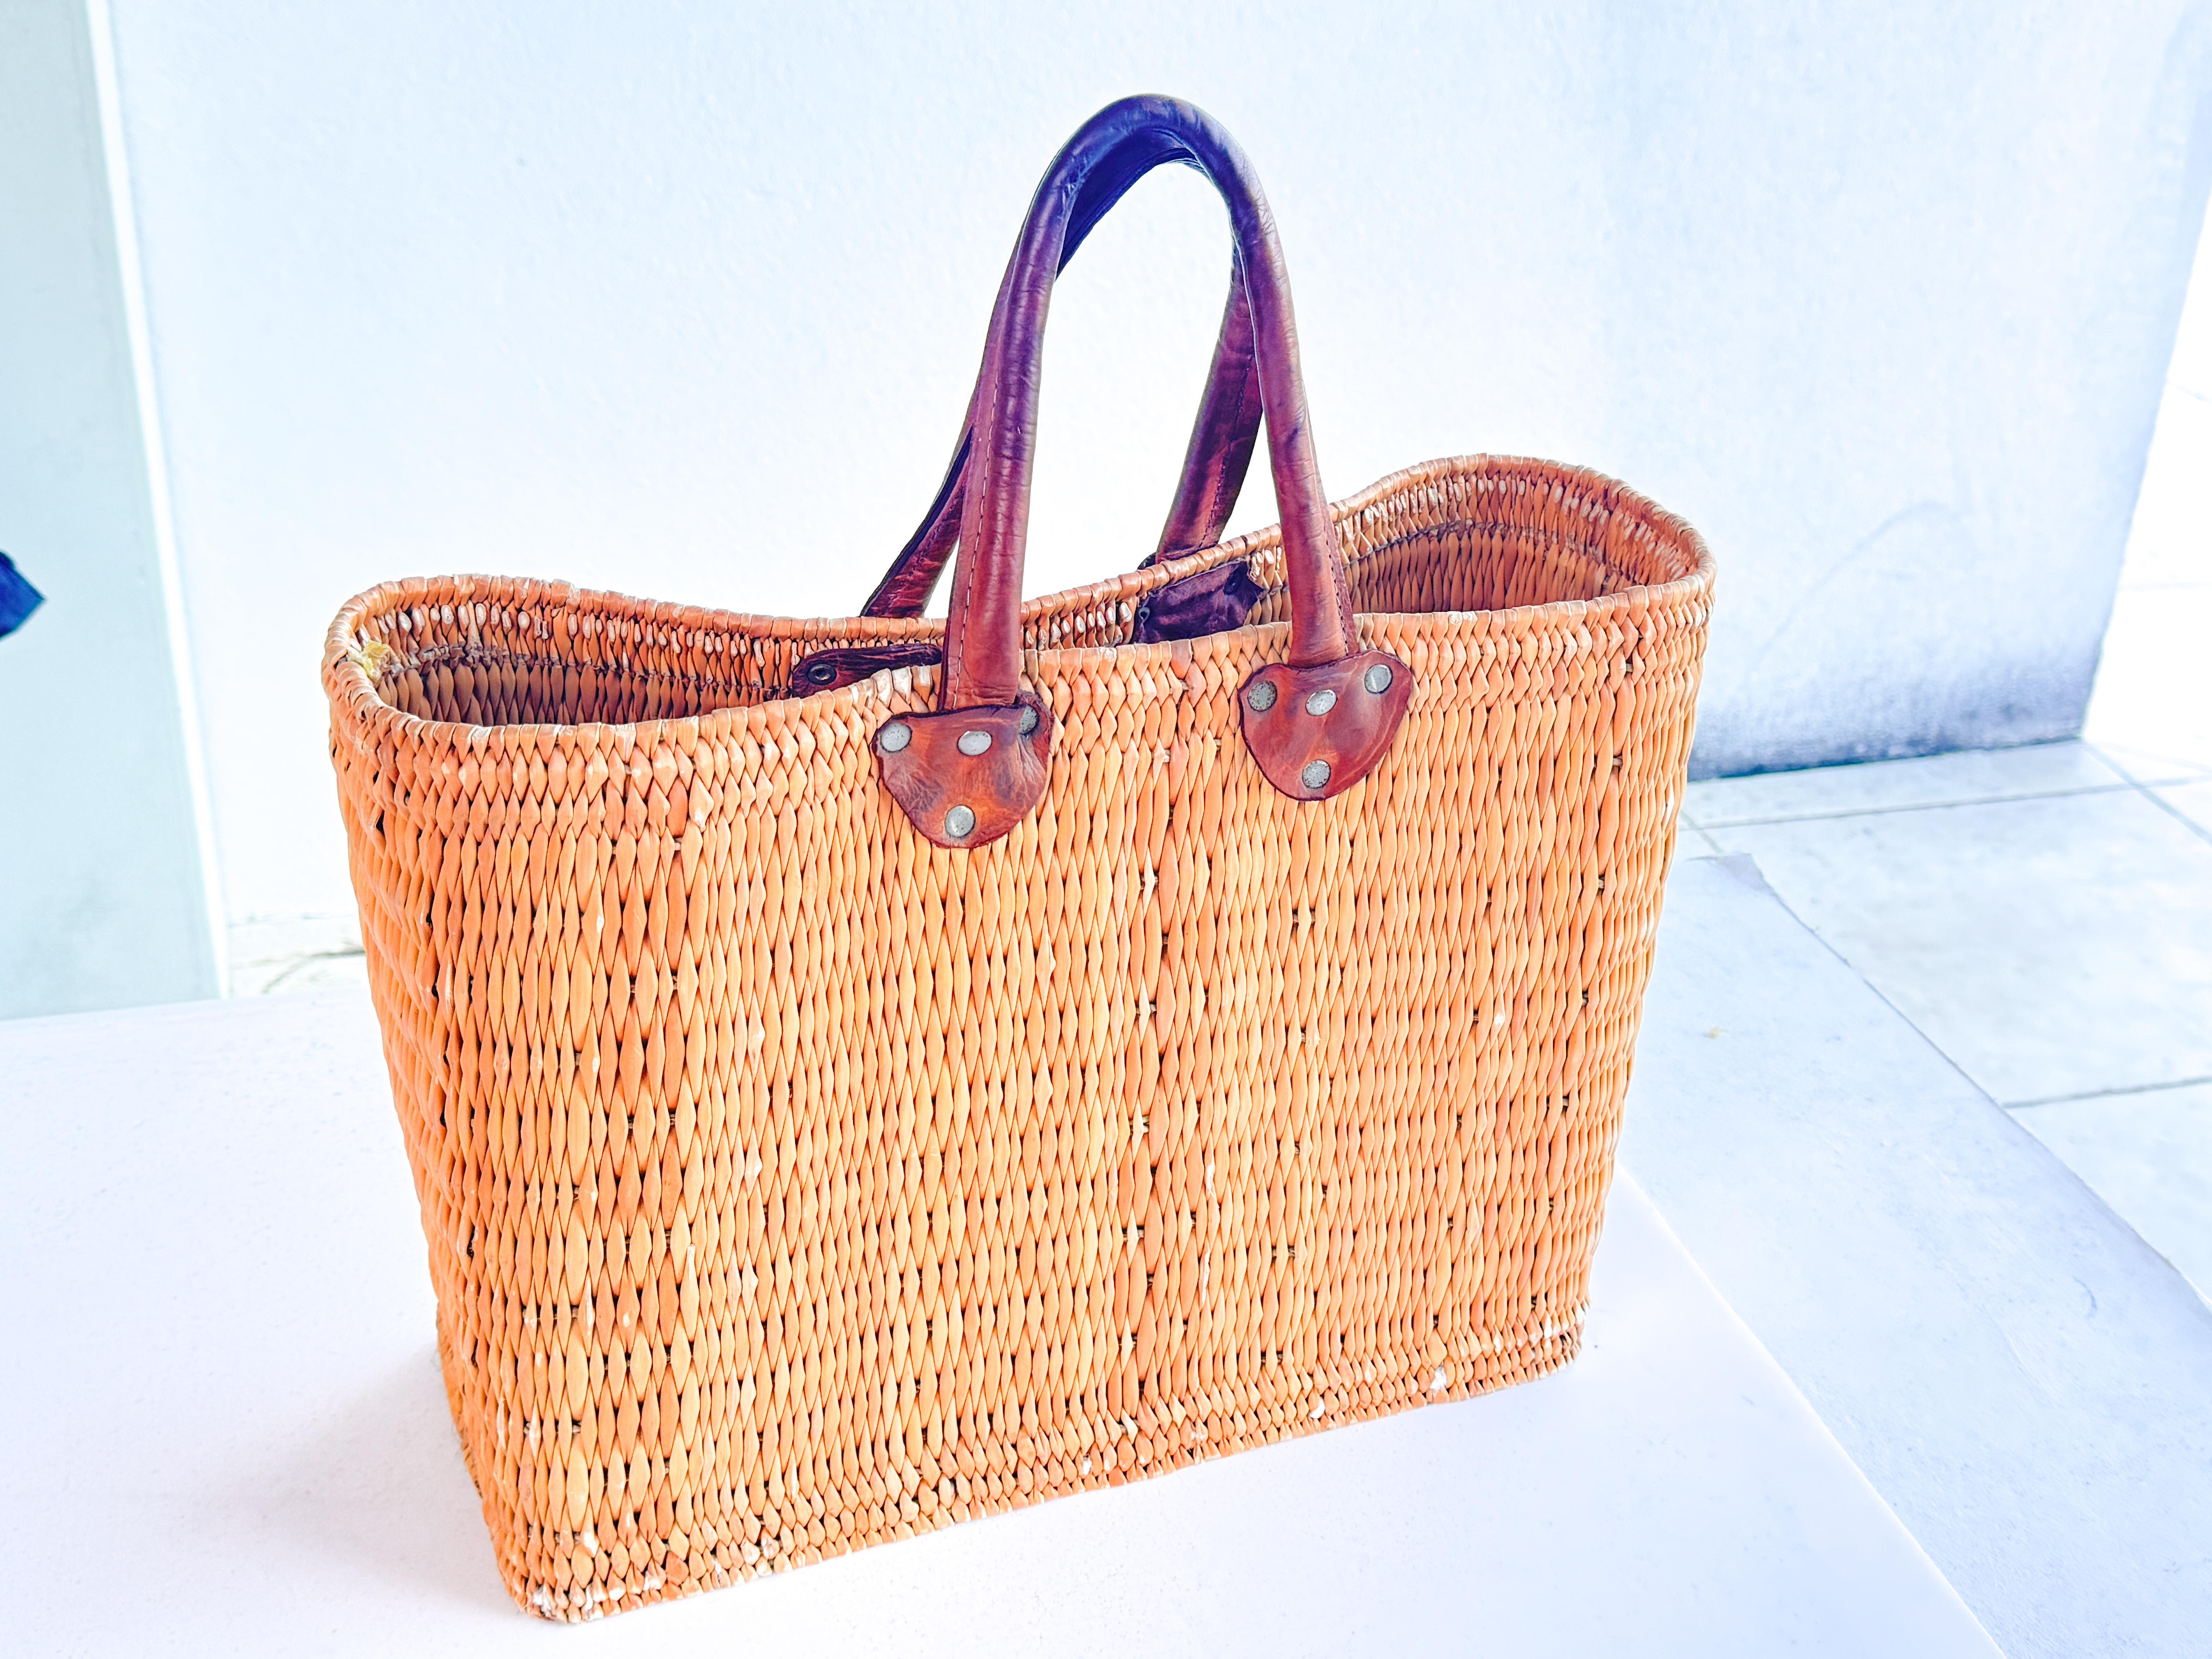 Vintage French Wicker Basket, Gold Color Stitched Leather Bag Handles France In Good Condition For Sale In Auribeau sur Siagne, FR